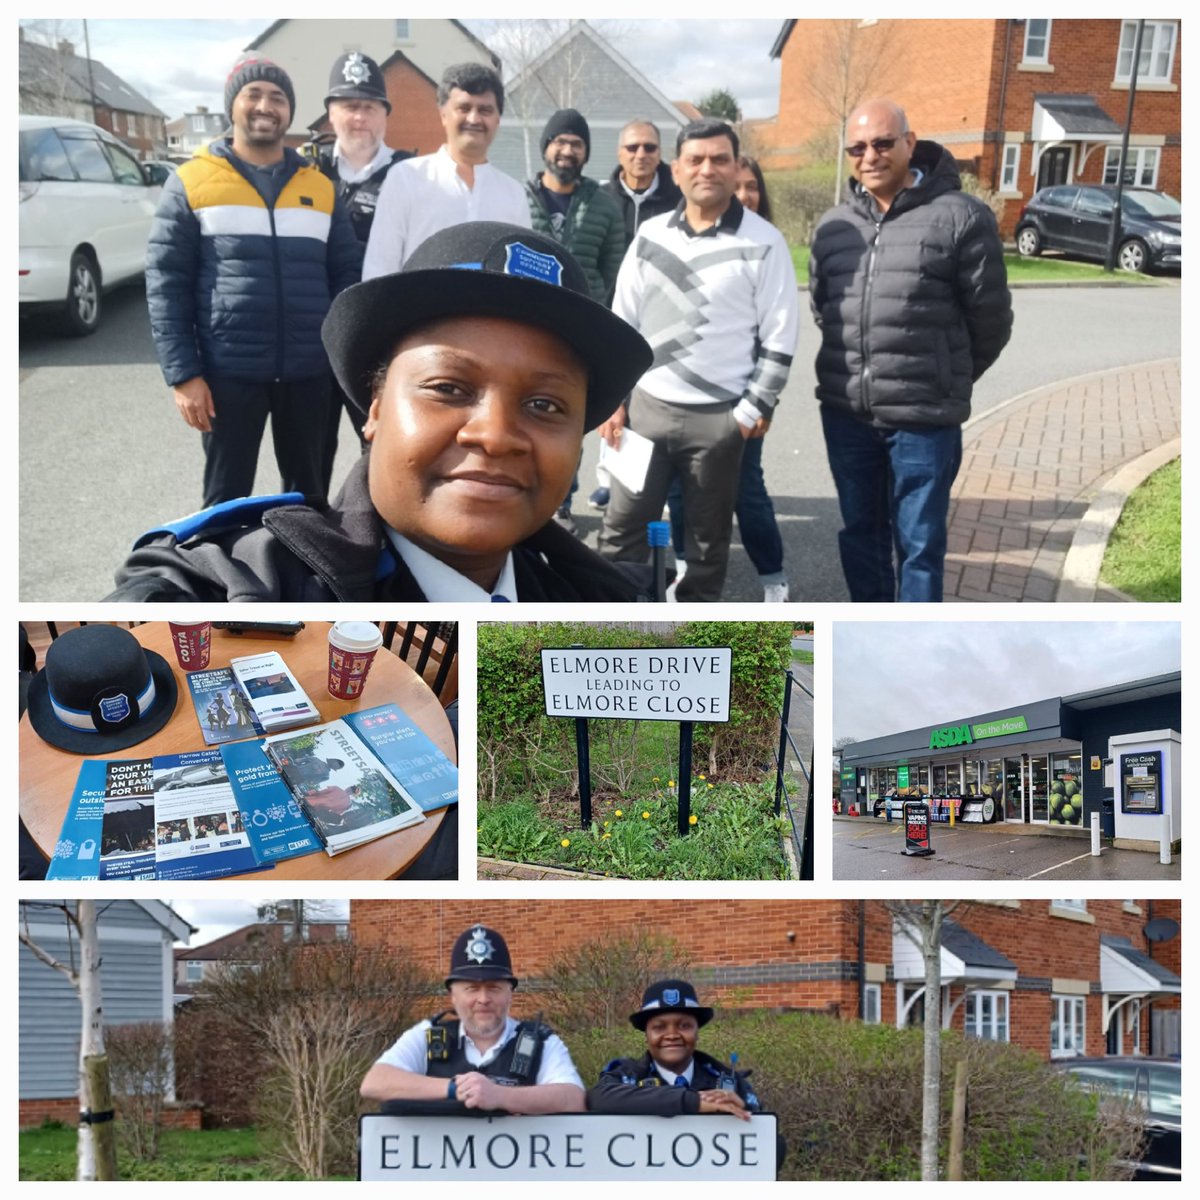 Officers were out & about on the ward today🌞 ✔️We visited our local shops businesses offered reassurance & CPA to staff ✔️Held a street briefing at Elmore Drive/Close ✔️Cuppa with a Copper at Costa Coffee - if you missed us, the next session - Sun 24th March 2pm Costa Coffee HA3